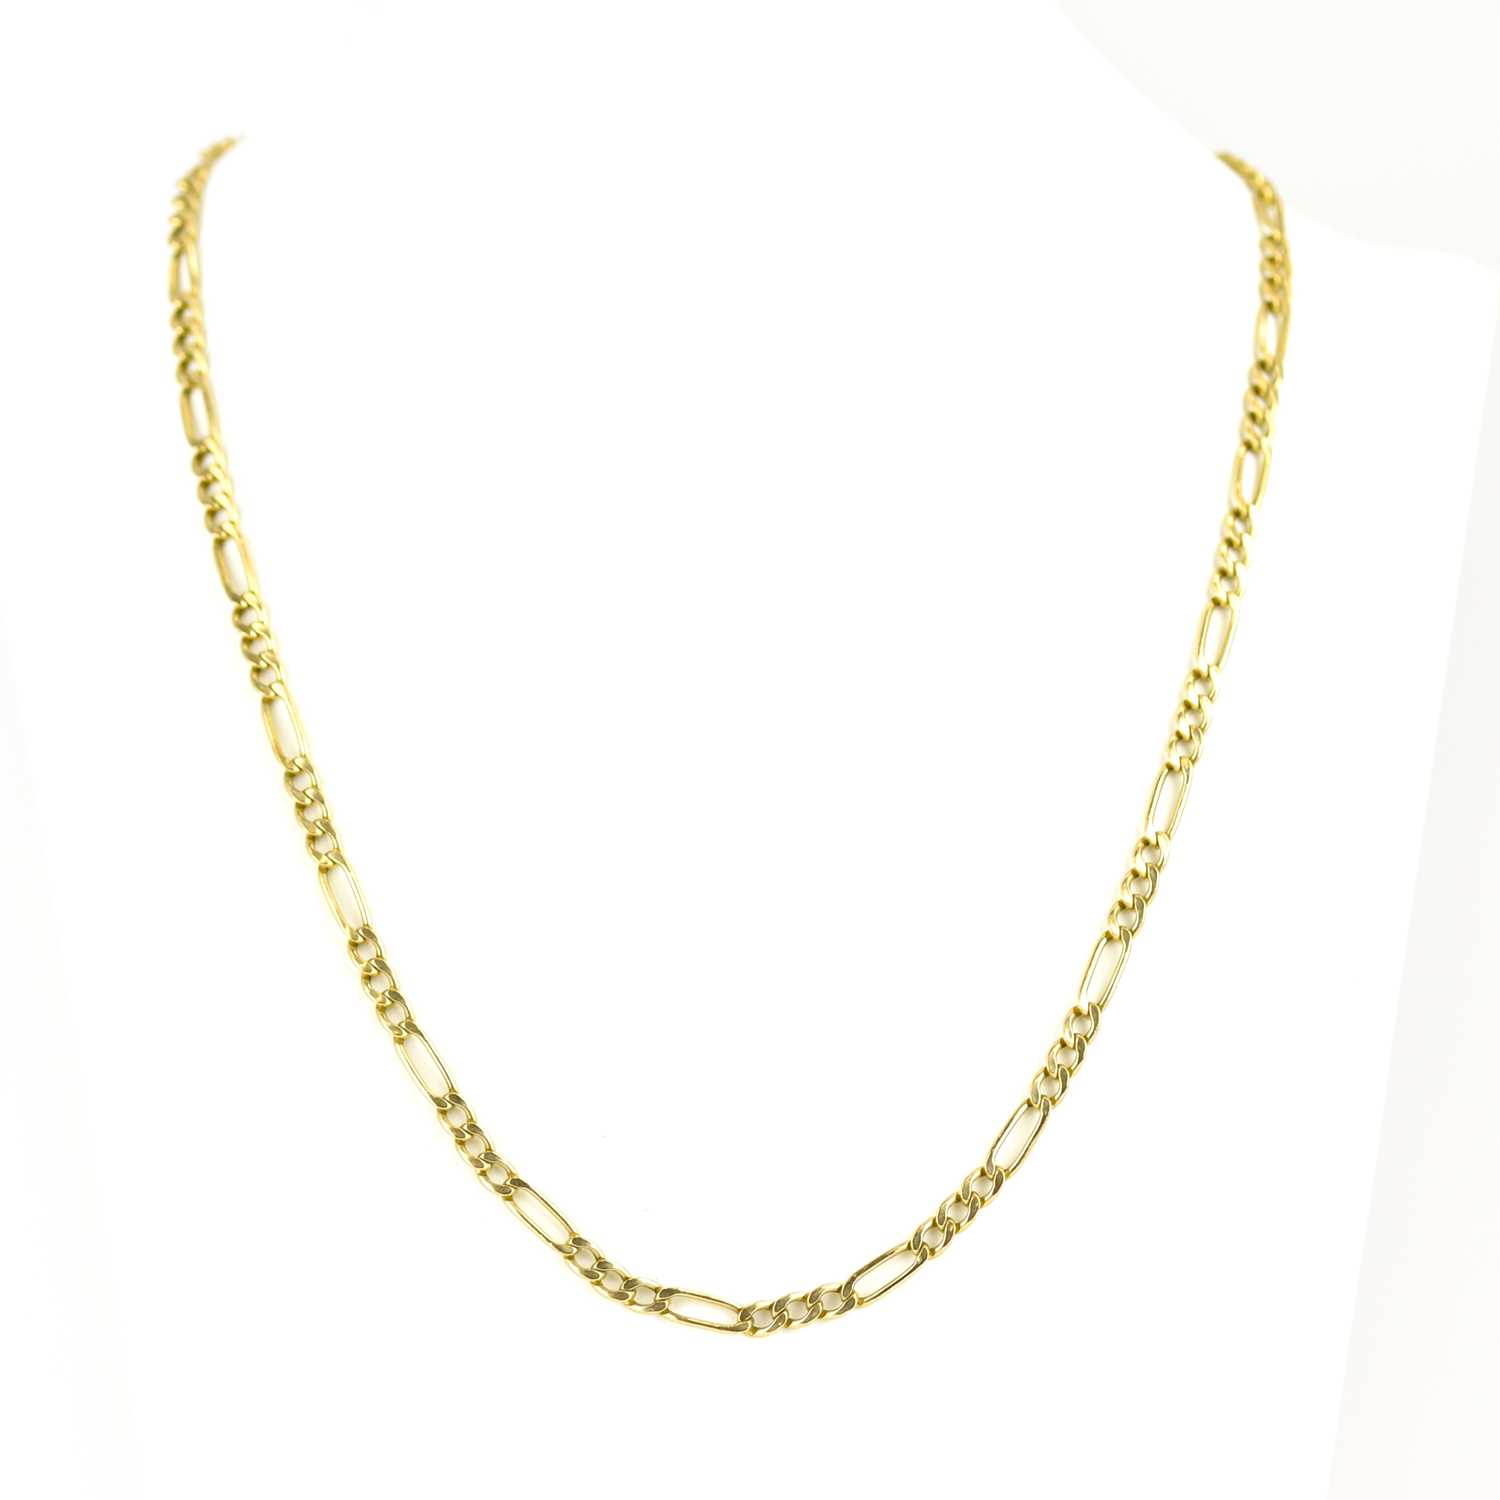 A 9ct gold Figaro link necklace with ring clasp, length 50cm, approx. 6g.